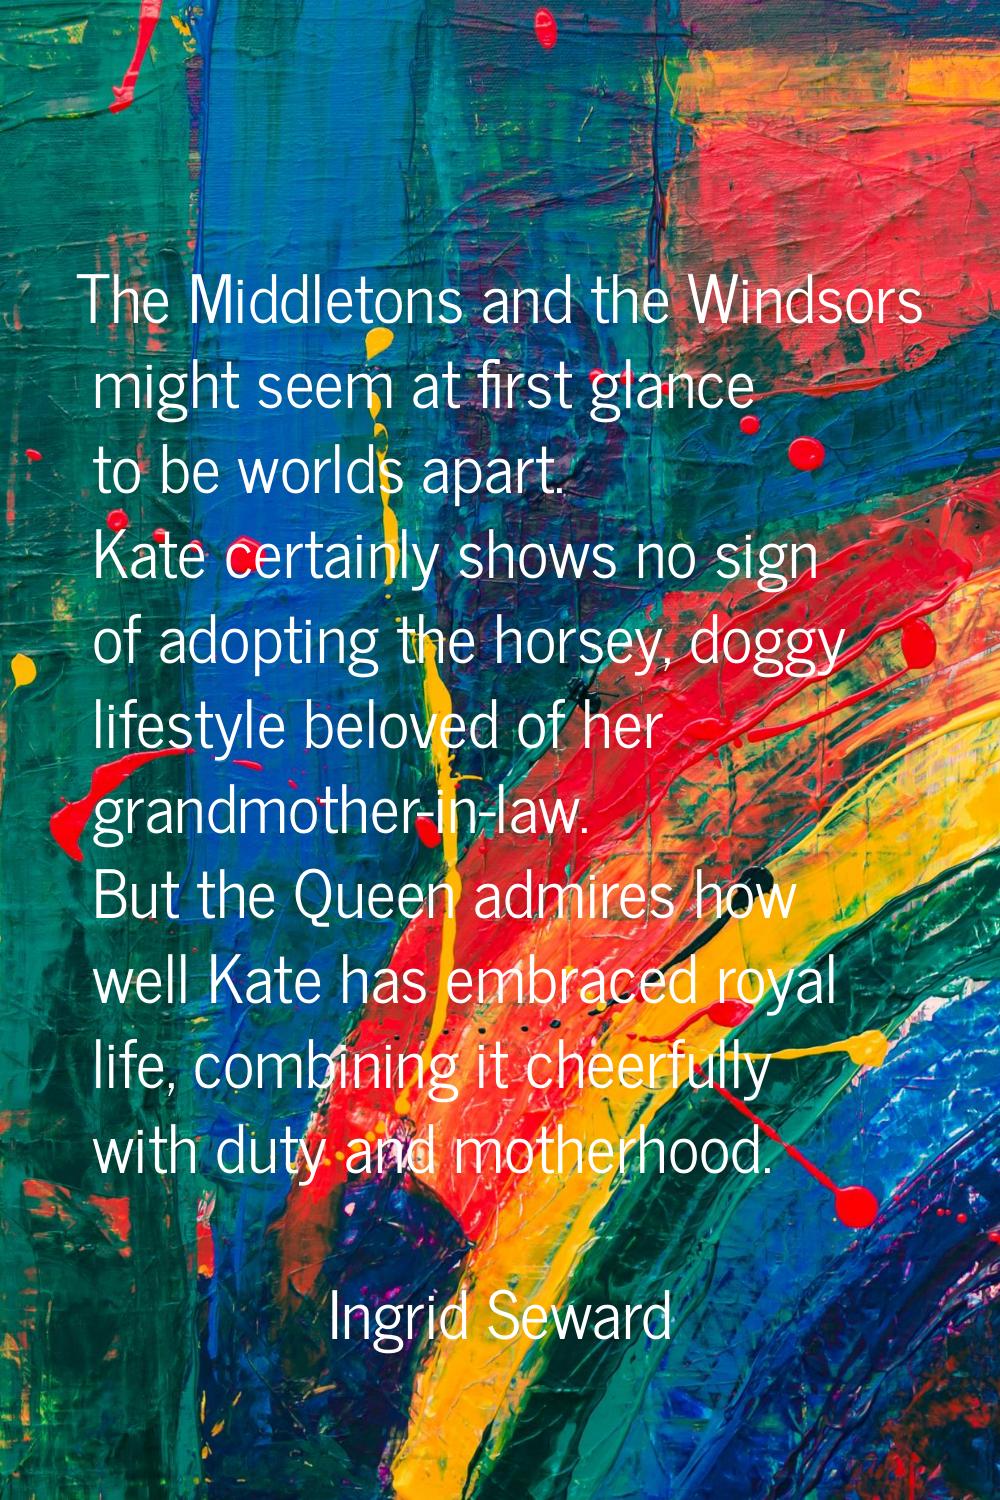 The Middletons and the Windsors might seem at first glance to be worlds apart. Kate certainly shows